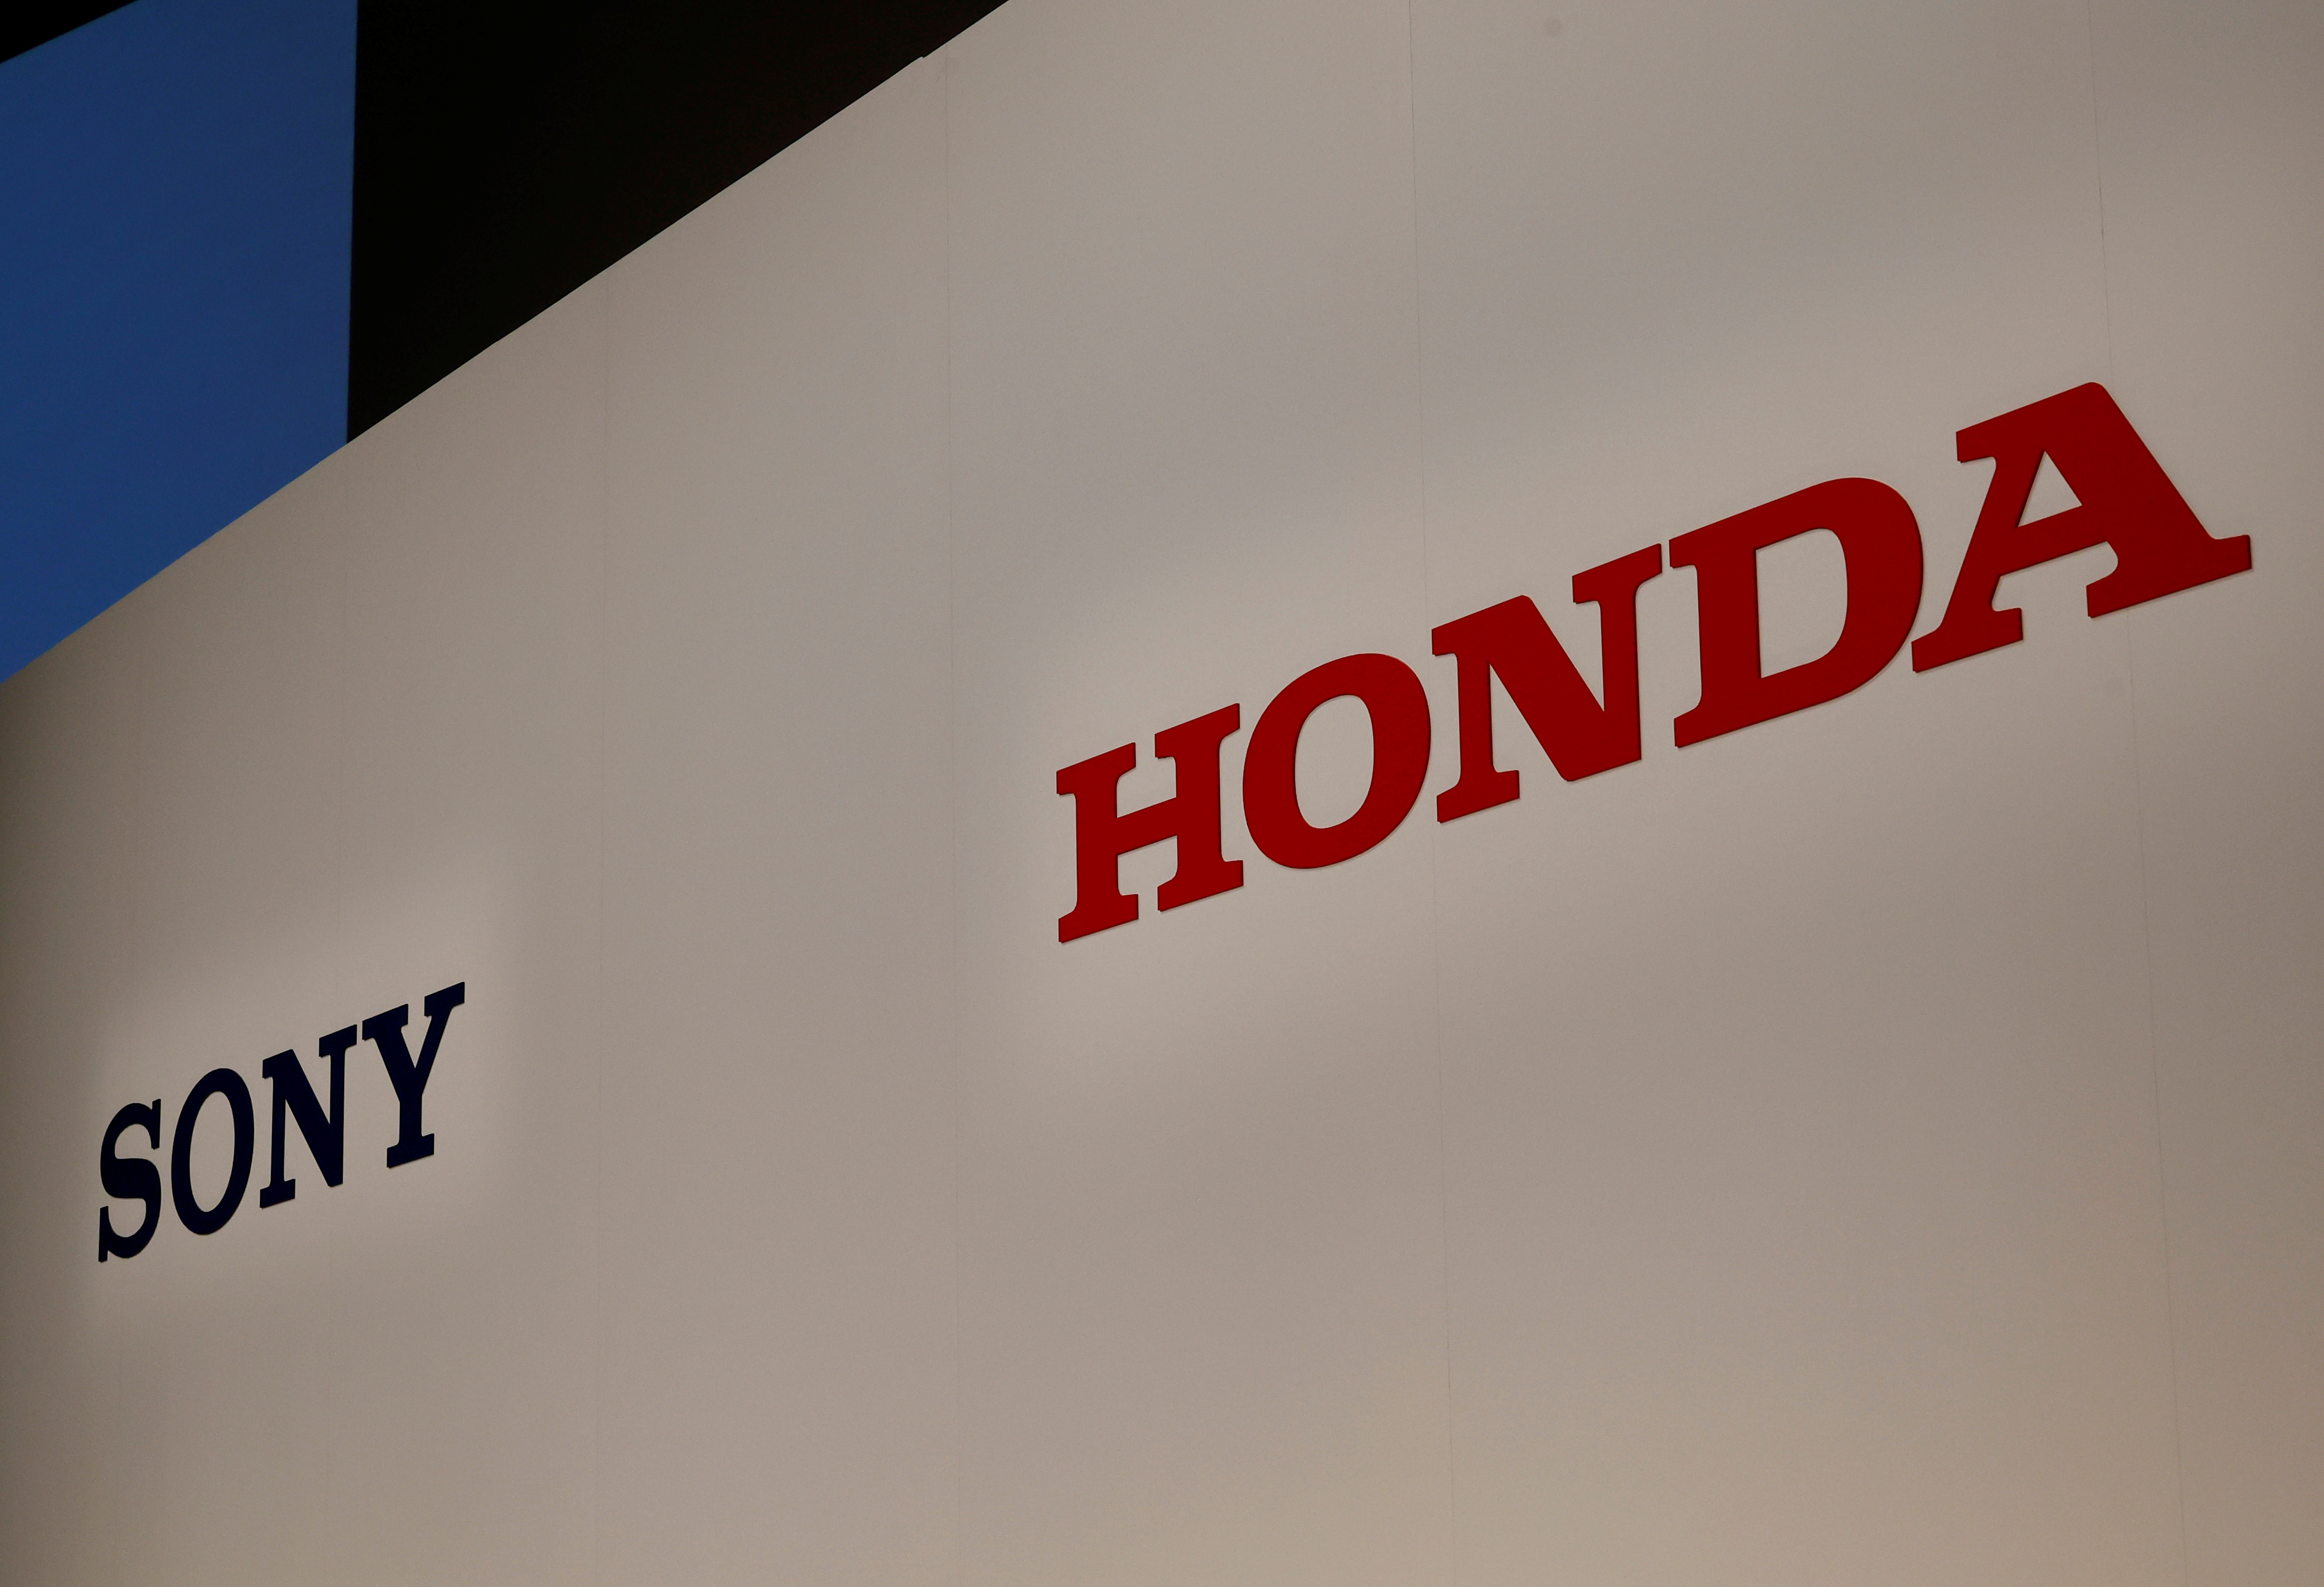 Sony Corp's and Honda Motor's logos are pictured at their joint news conference venue in Tokyo